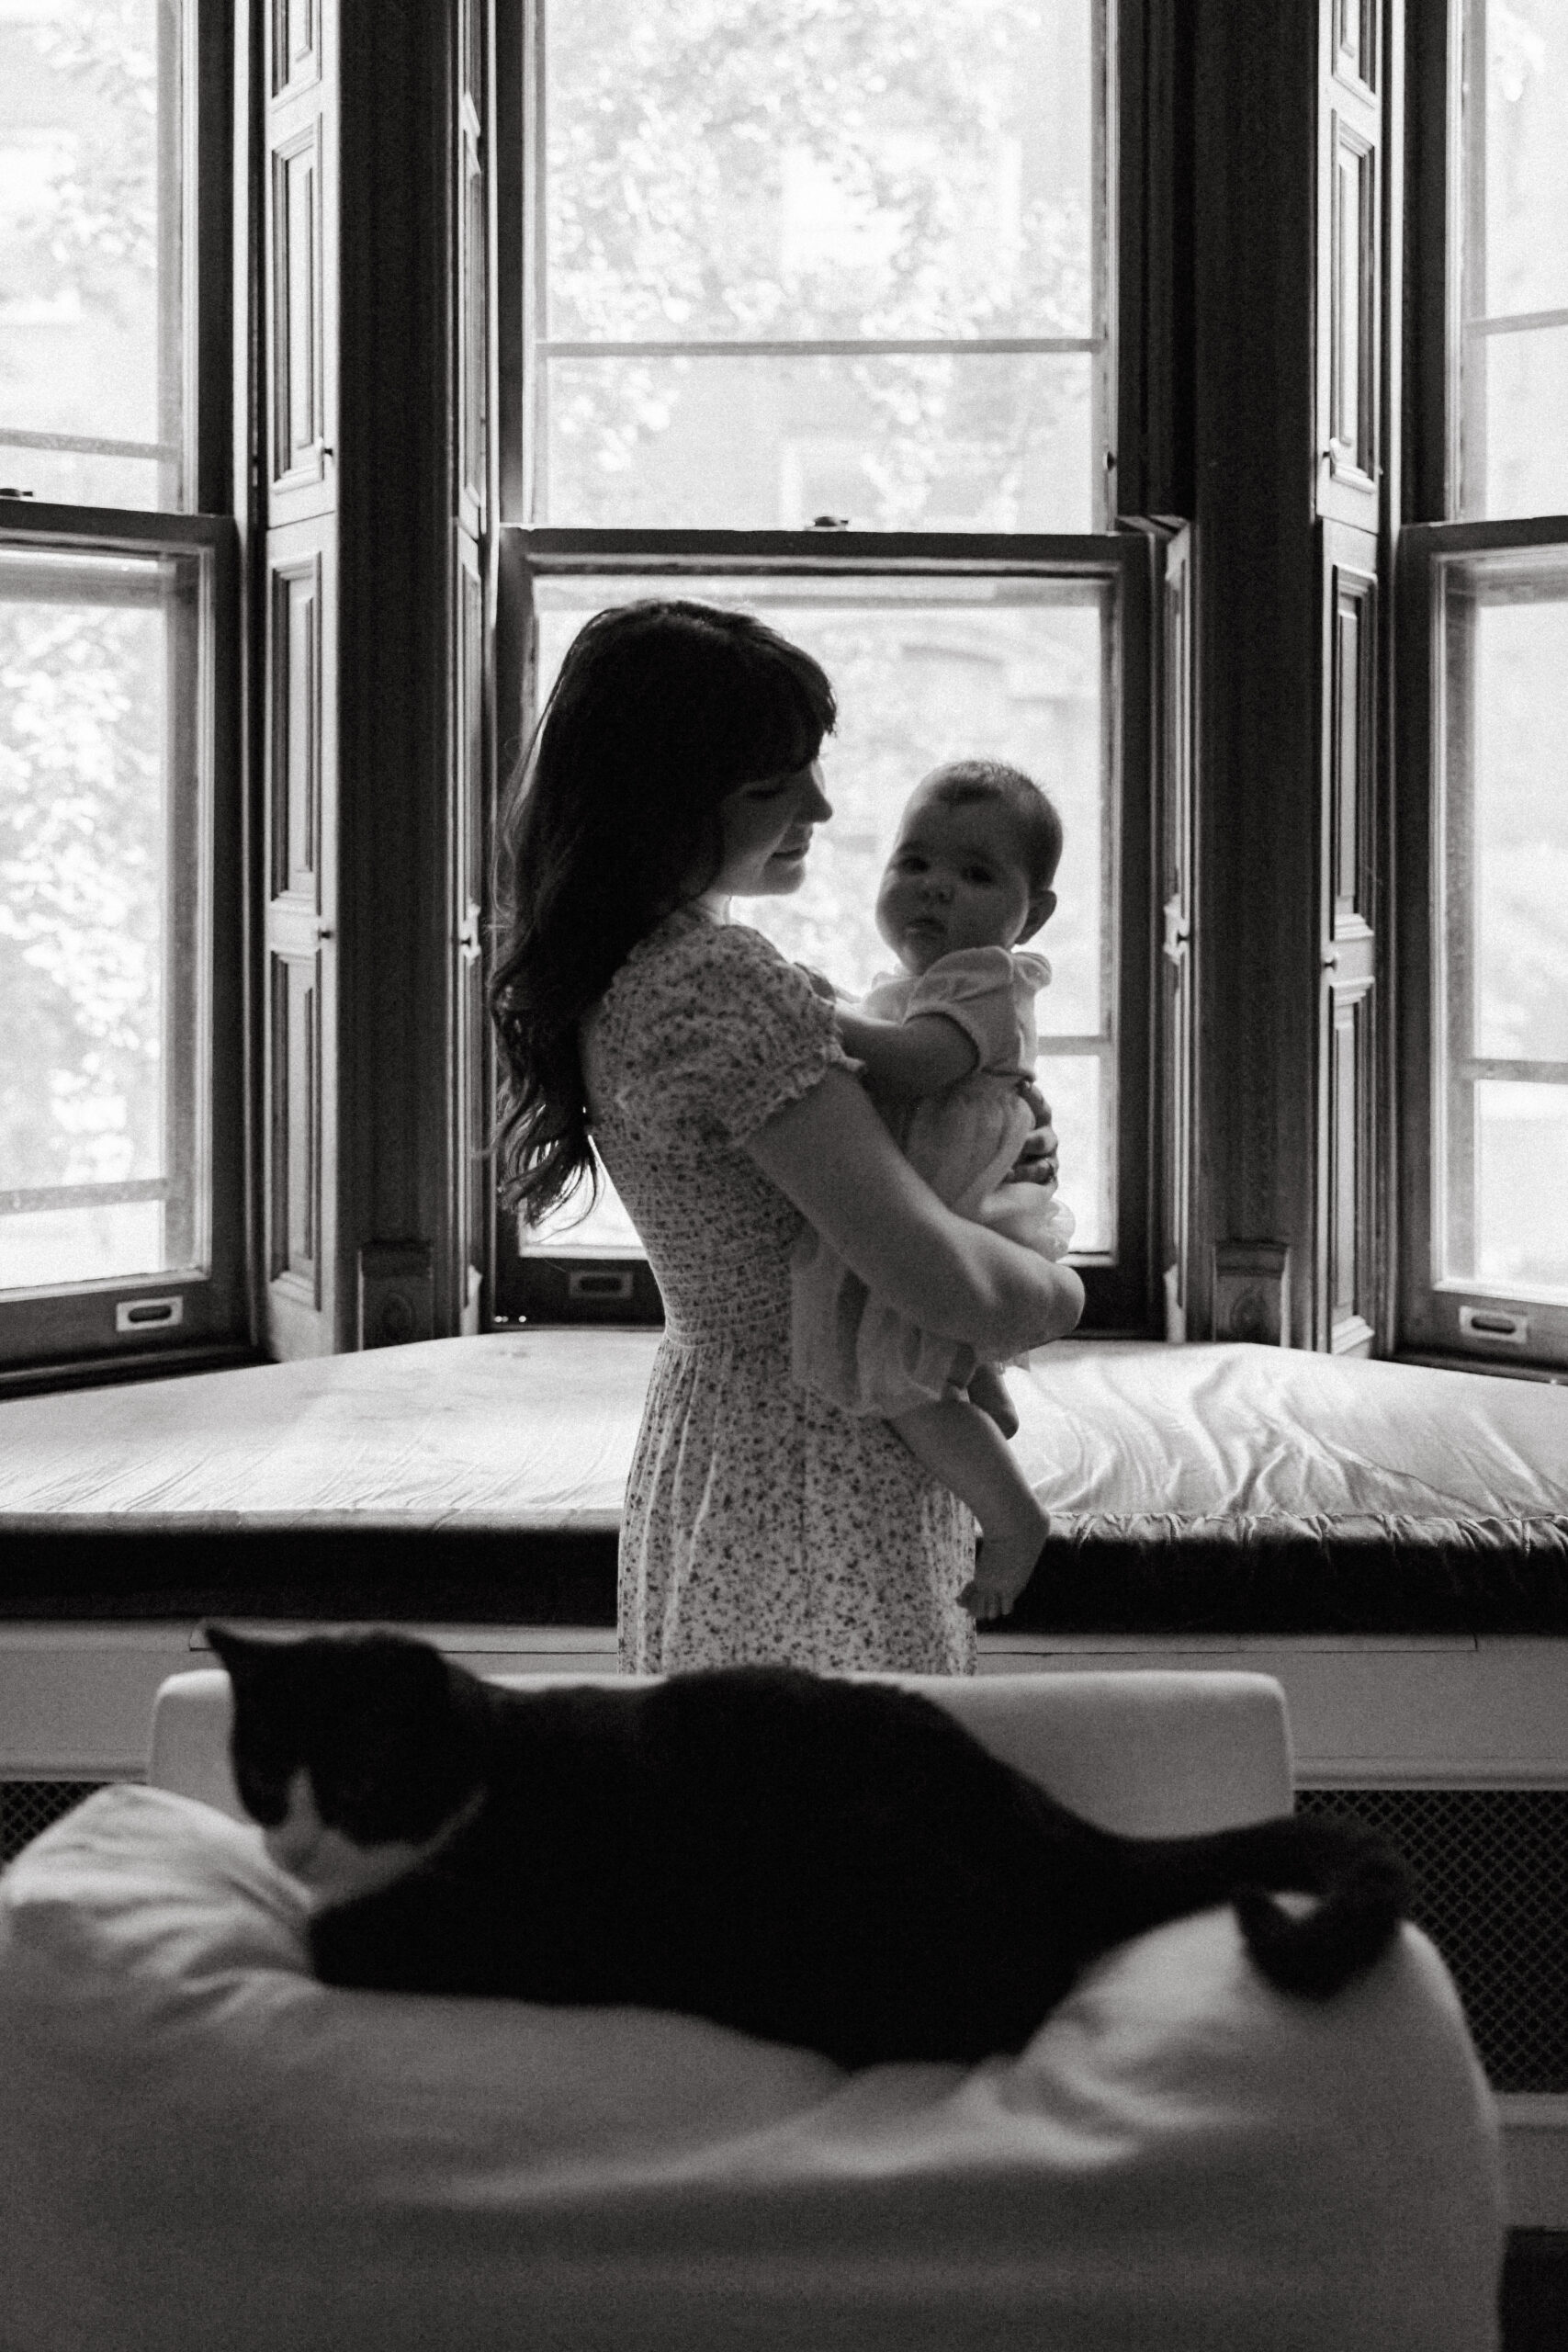 Black and white intimate photo of mom and infant daughter together during their in home photo session